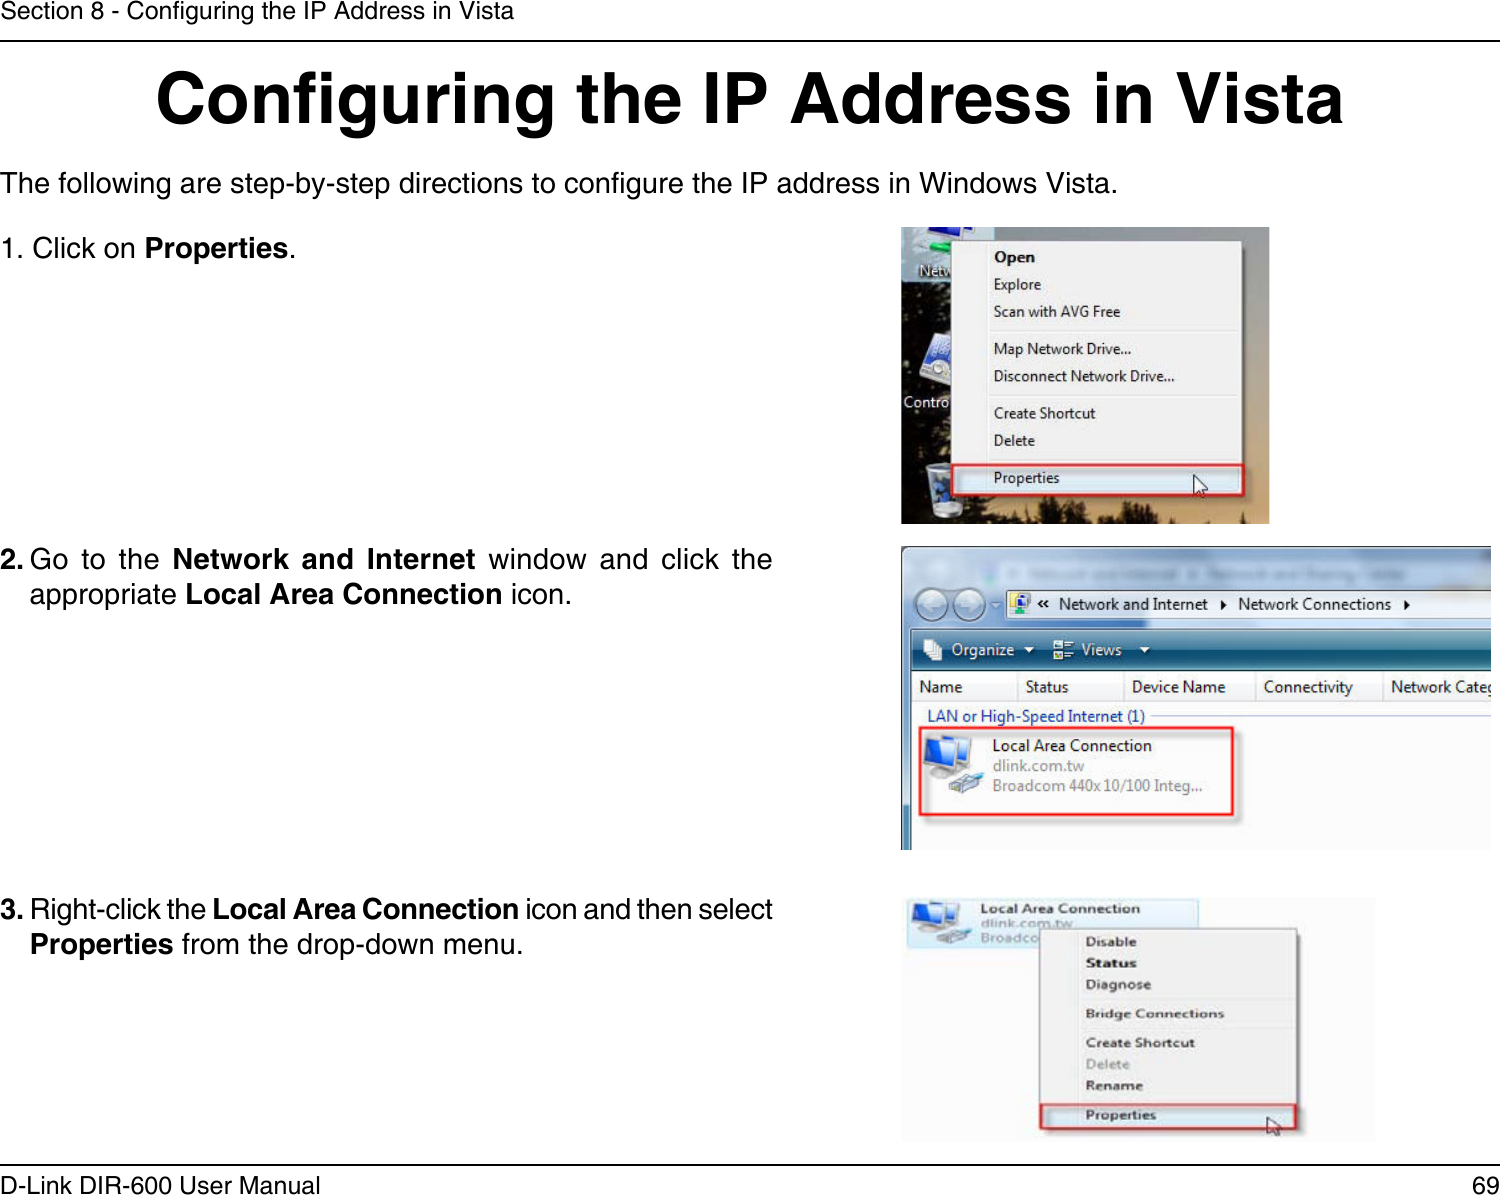 69D-Link DIR-600 User ManualSection 8 - Conguring the IP Address in VistaConguring the IP Address in VistaThe following are step-by-step directions to congure the IP address in Windows Vista.    2. Go  to  the  Network  and  Internet  window  and  click  the appropriate Local Area Connection icon. 1. Click on Properties.     3. Right-click the Local Area Connection icon and then select Properties from the drop-down menu. 